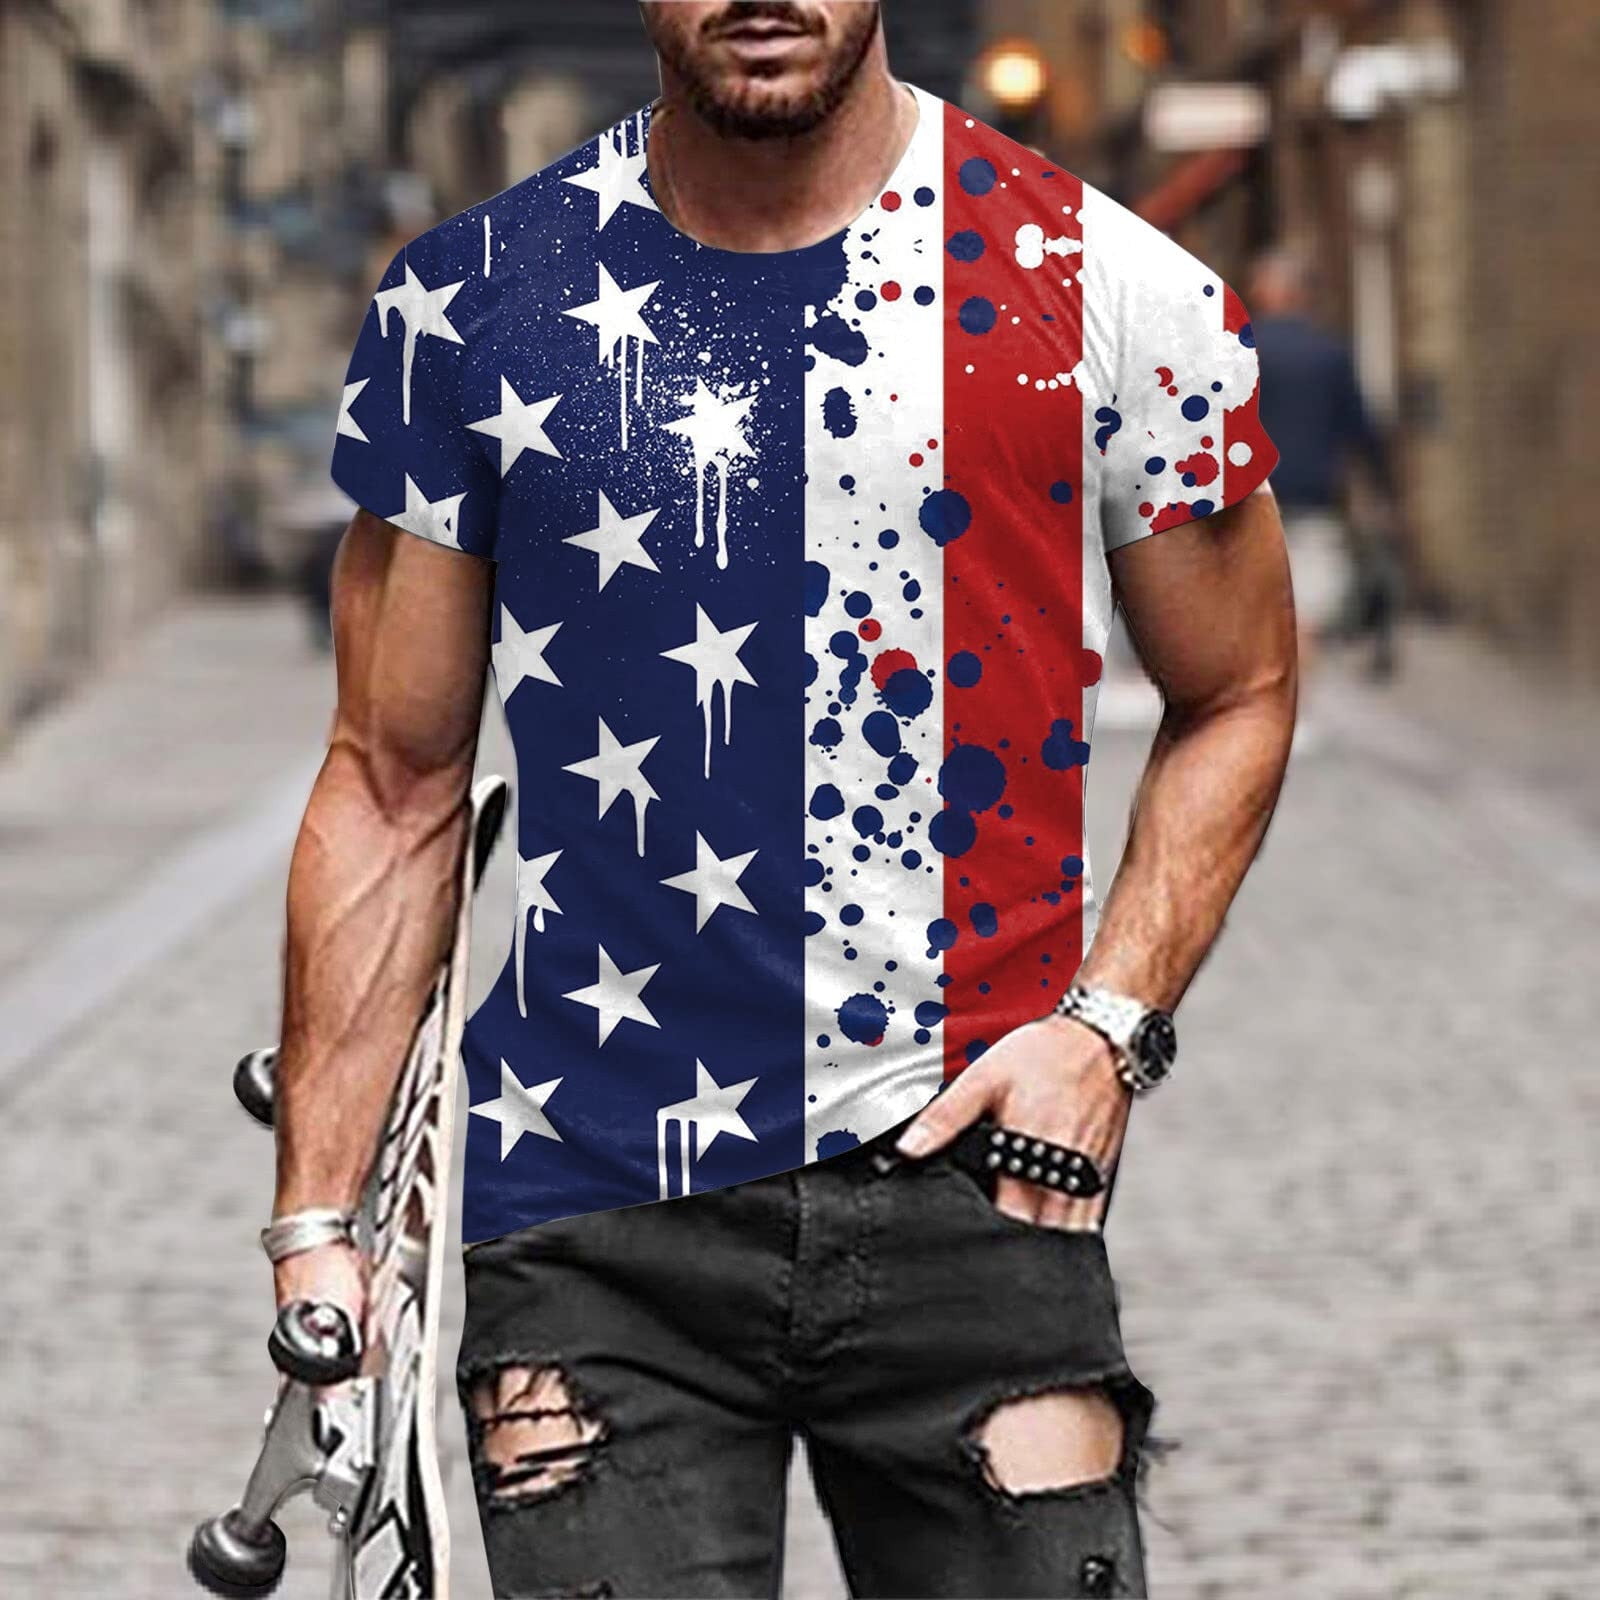 Soldier Short Sleeve for Men American Flag Plus Size T-Shirt Retro Patriotic Blouse Muscle Workout Athletics Tee Tops 